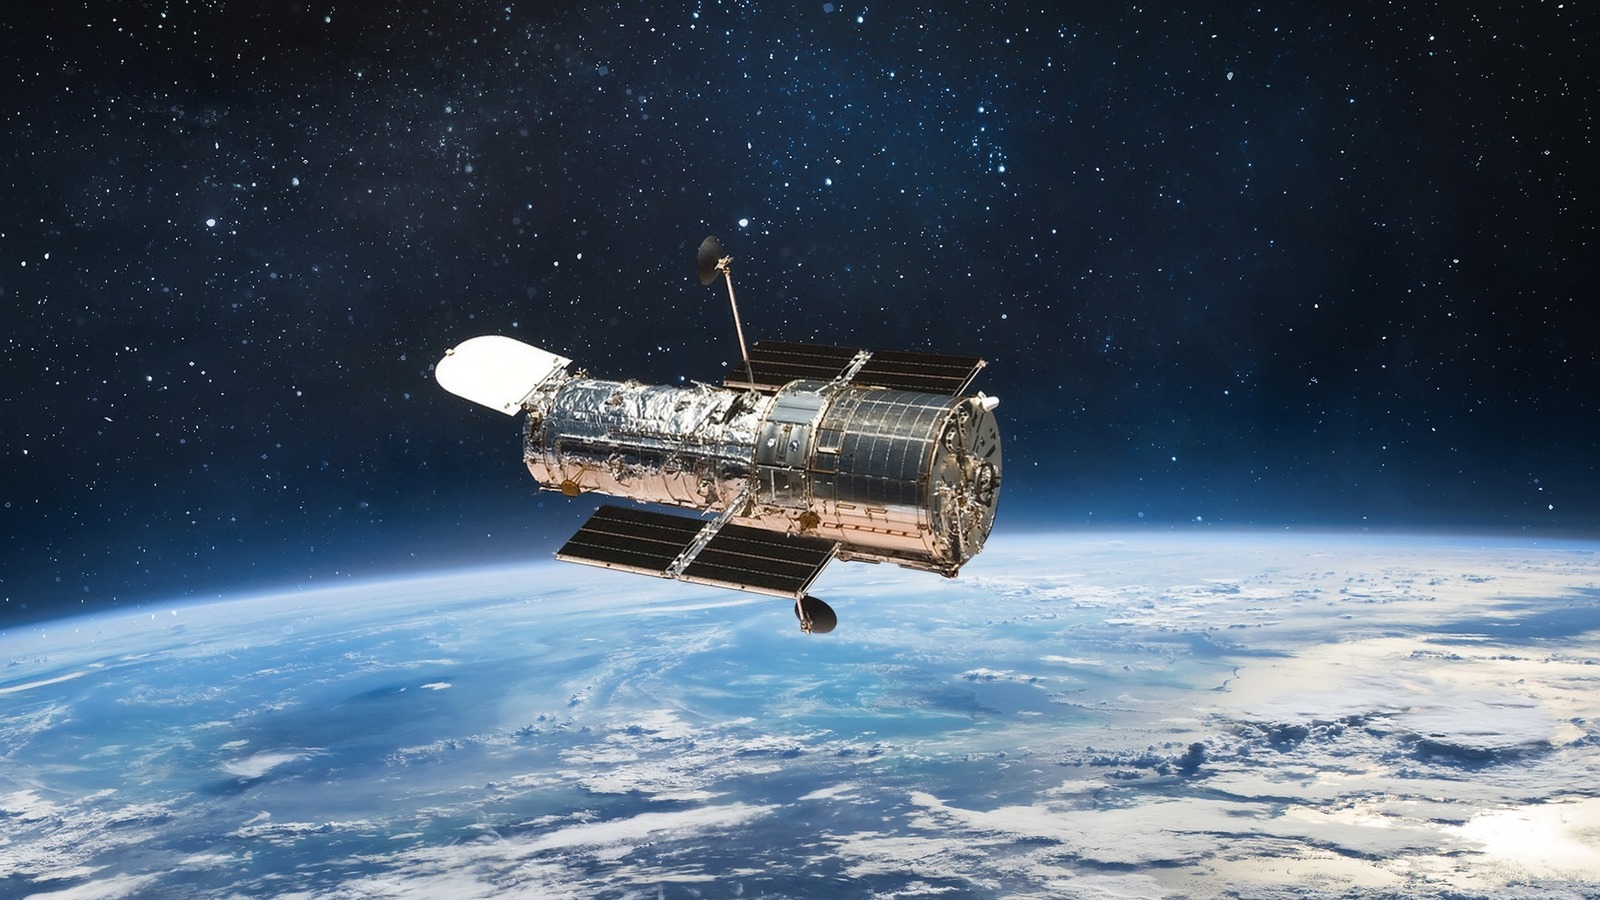 NASA And SpaceX May Work Together To Extend Hubble Telescope’s Life